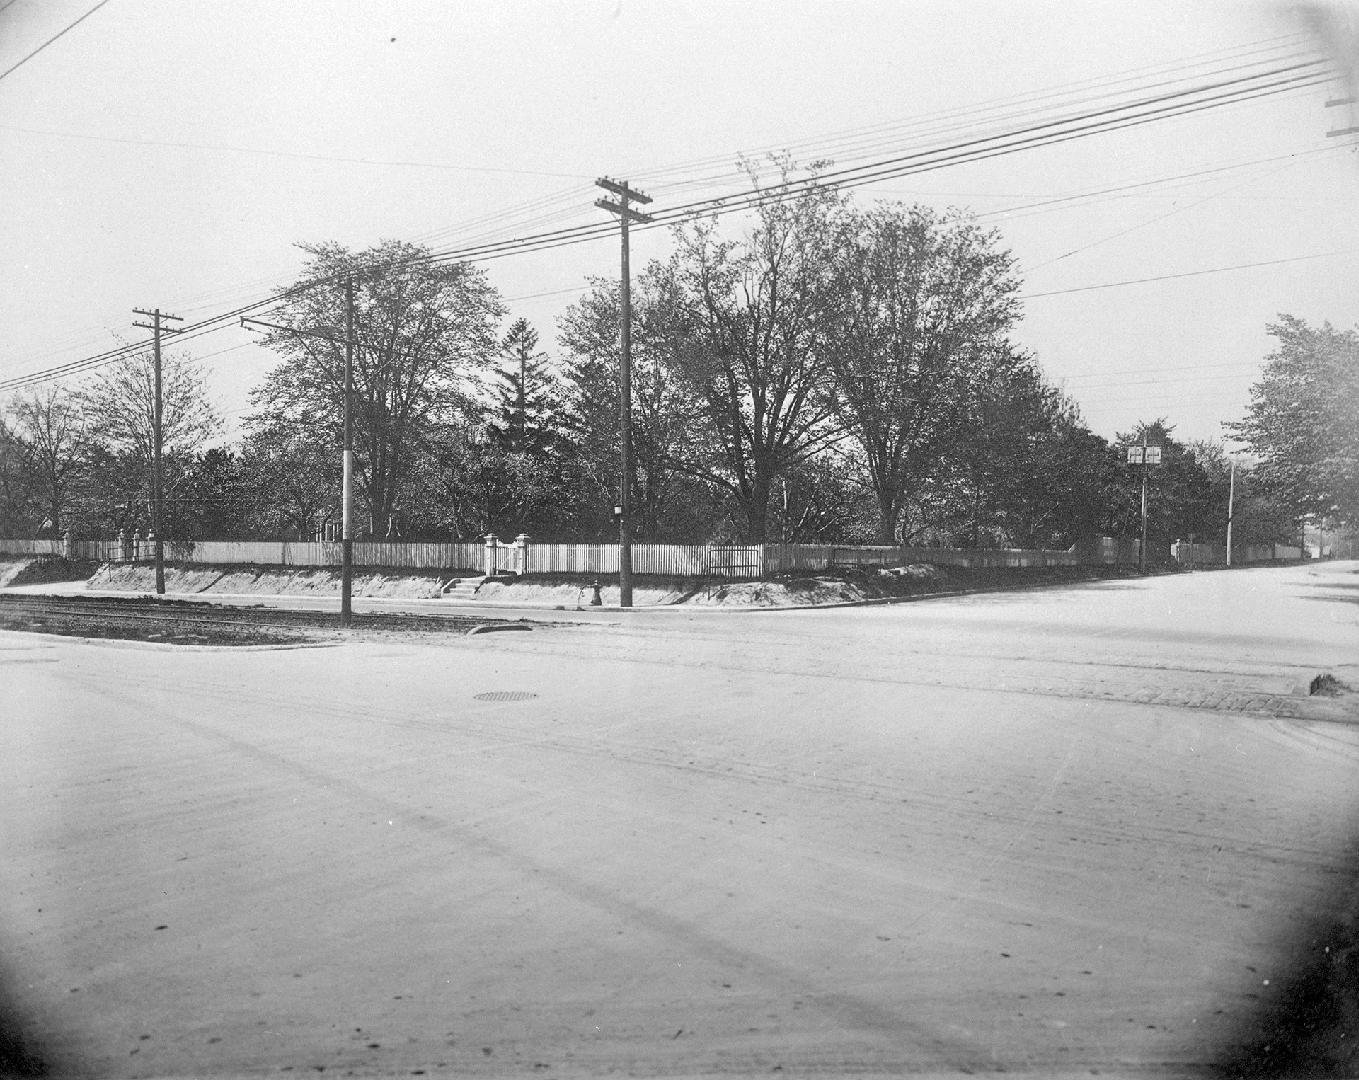 A photograph of a road and a fence in the background.